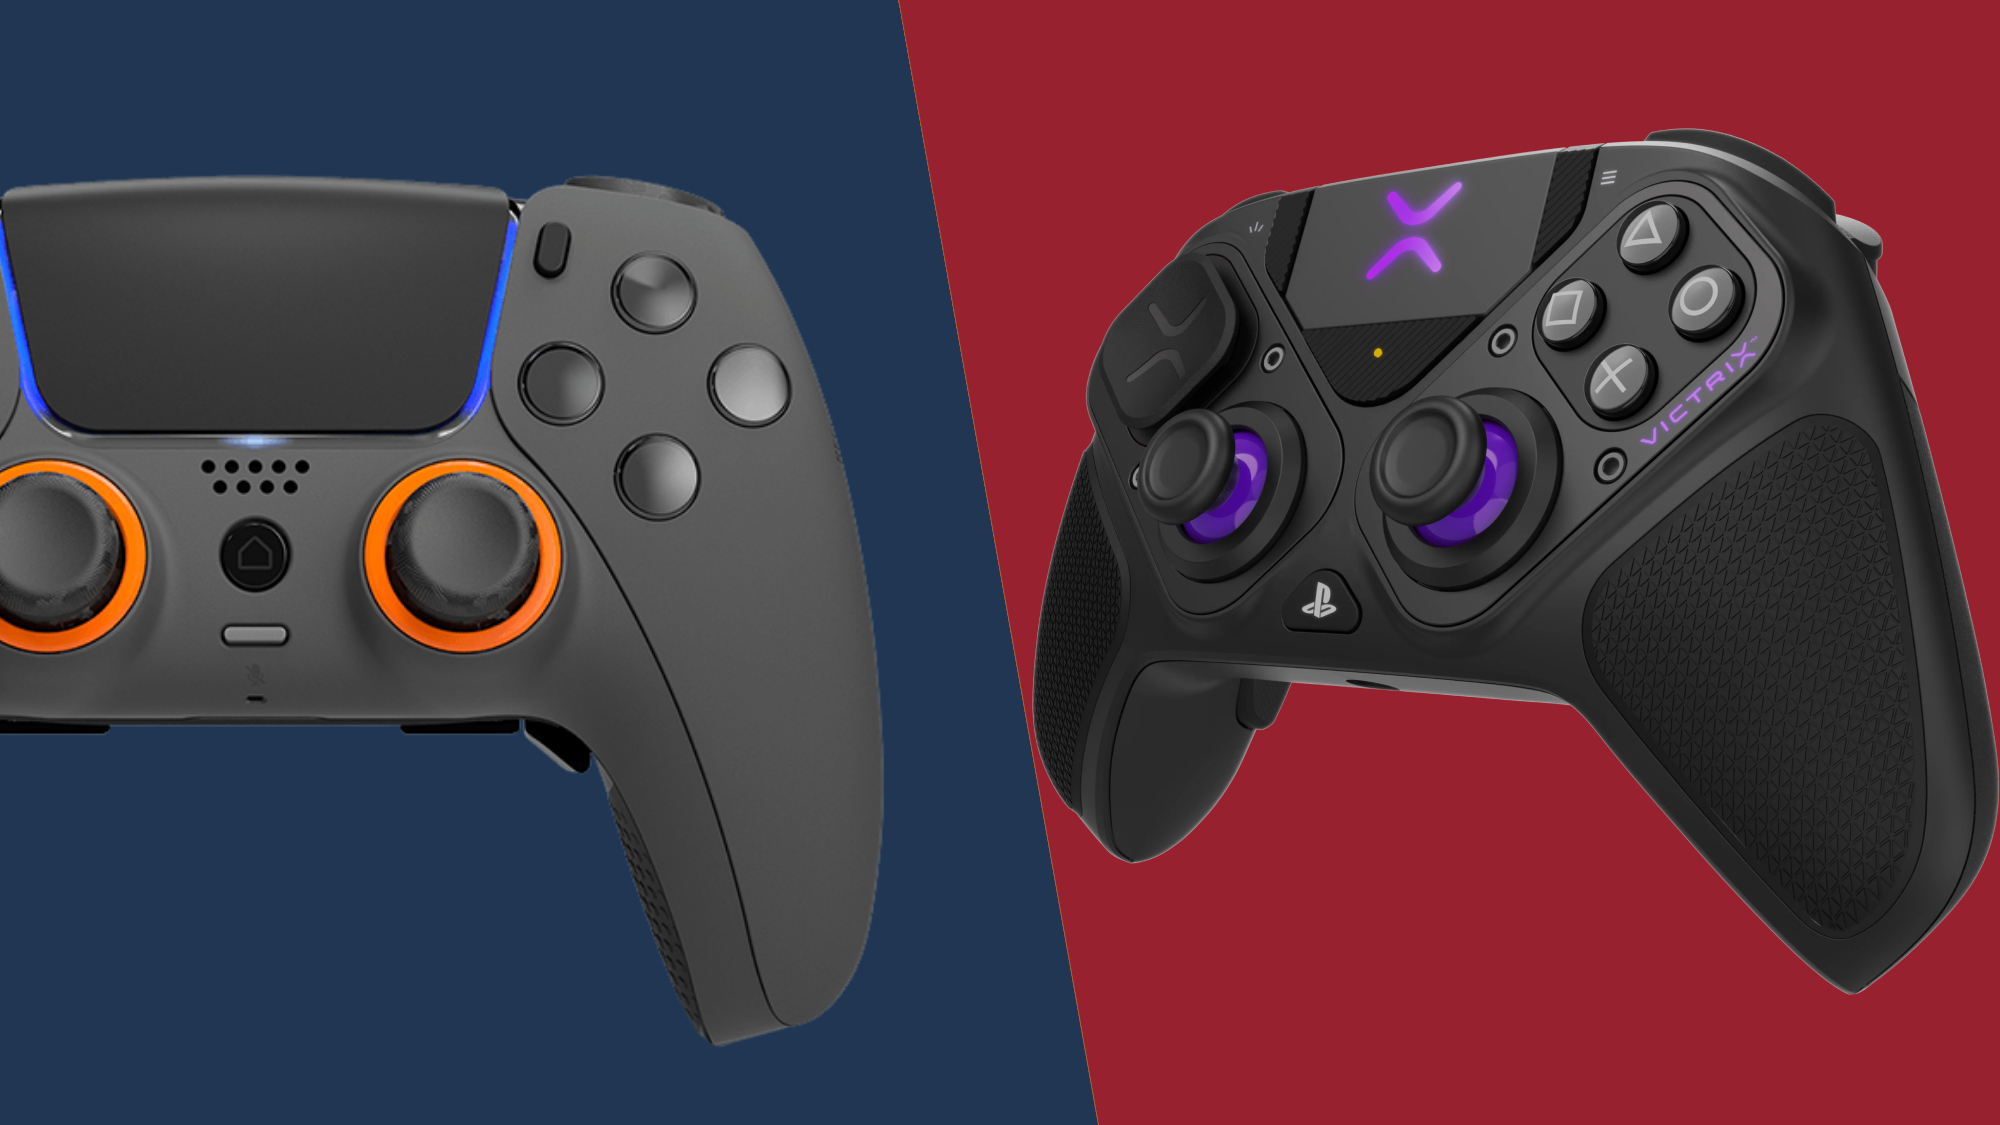 Scuf PS5 pro controller – which one is right for you?